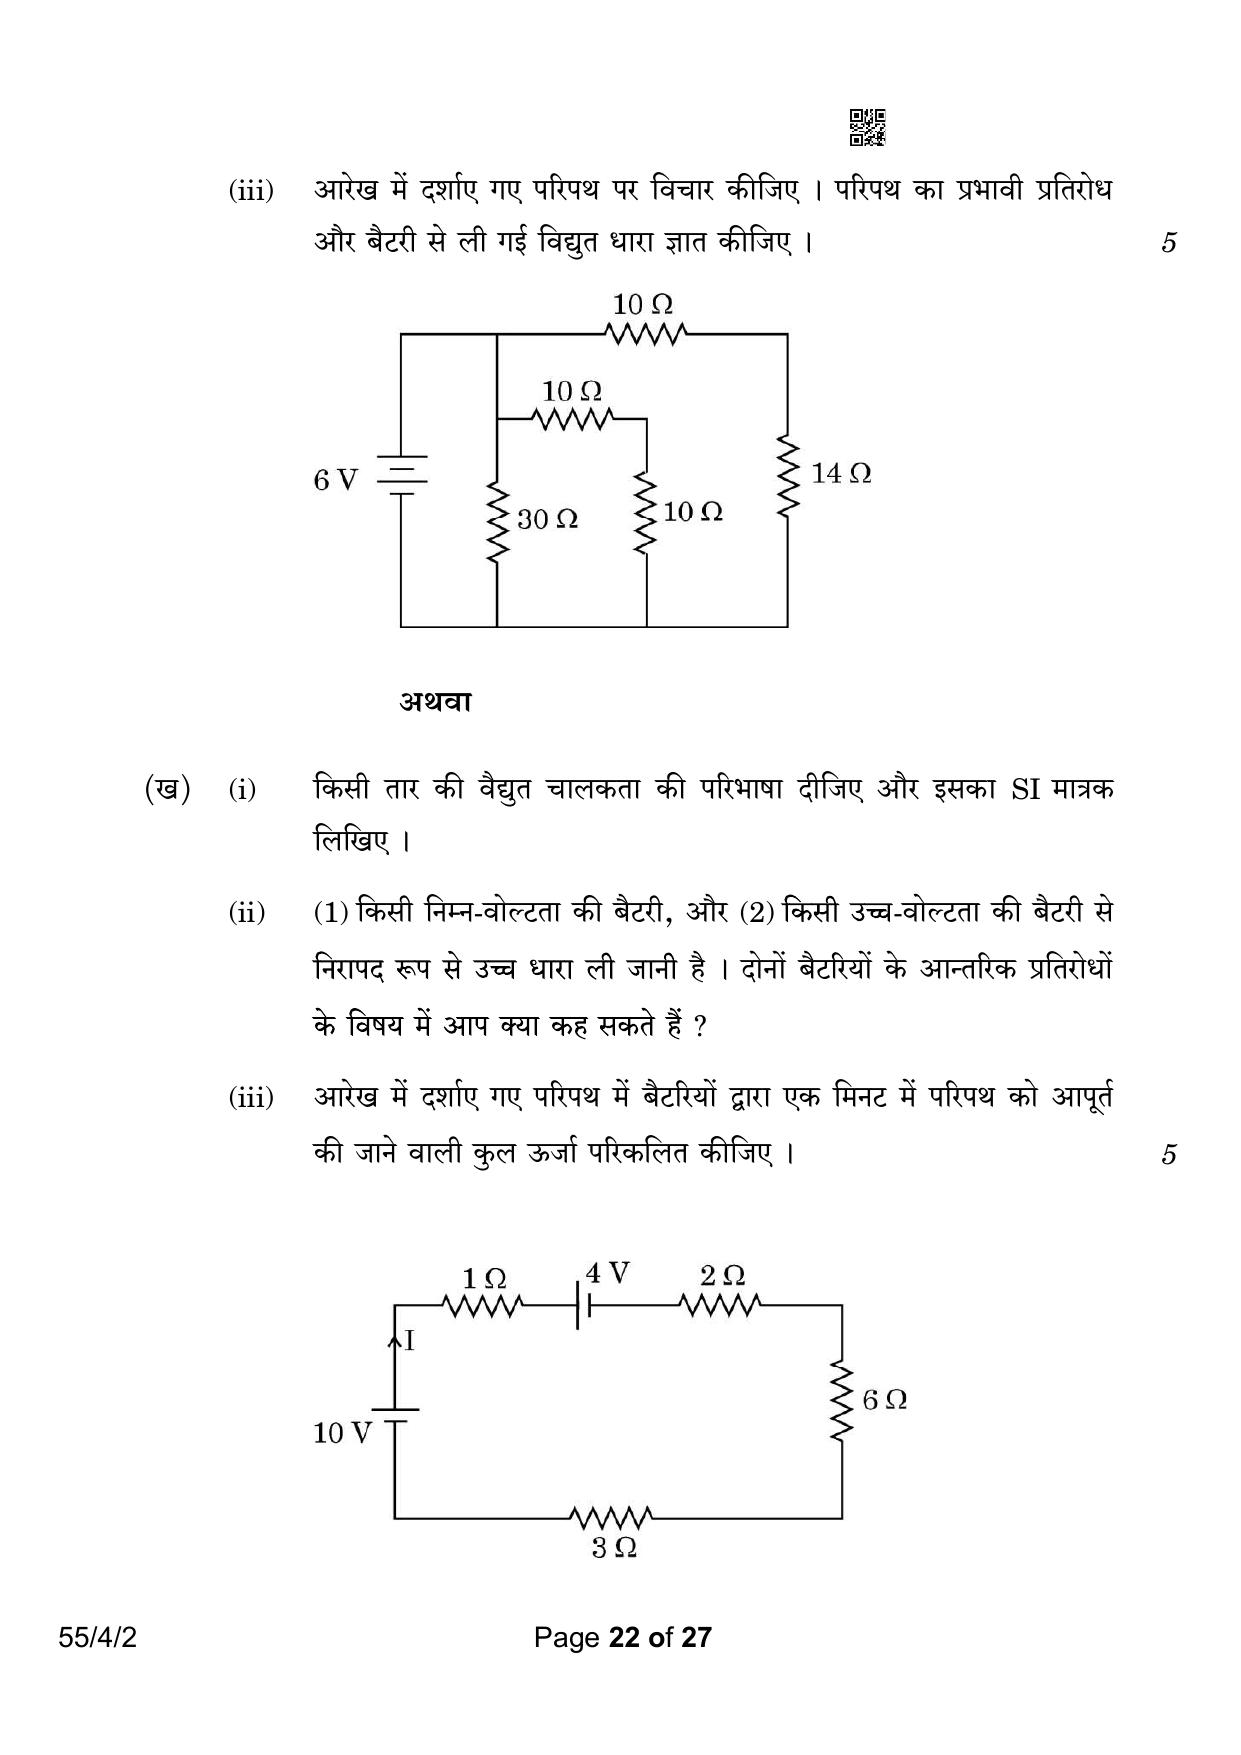 CBSE Class 12 55-4-2 Physics 2023 Question Paper - Page 22